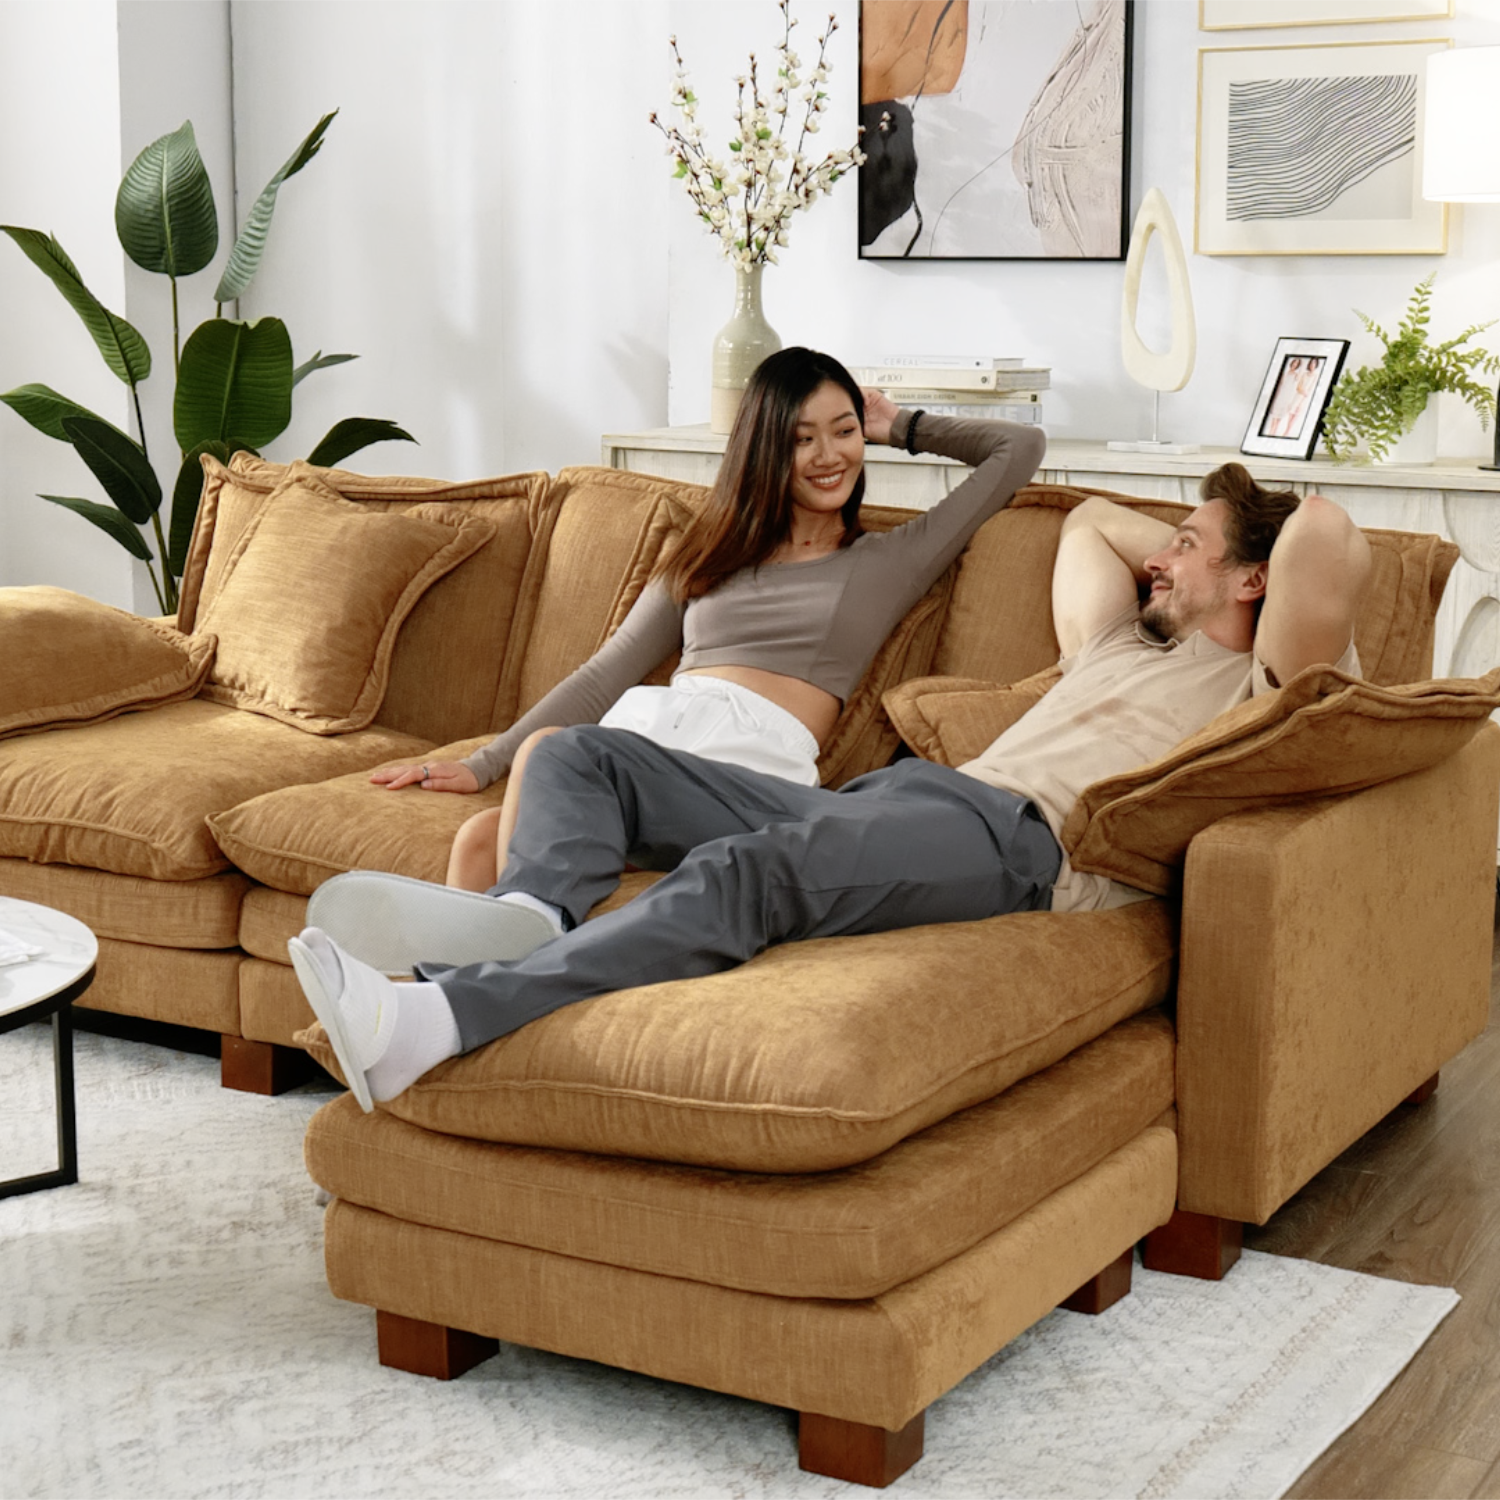 The Ultimate Relaxation - Mojuraa Stacked Tan Linen Sofa: Stack Up Your Dream Comfort